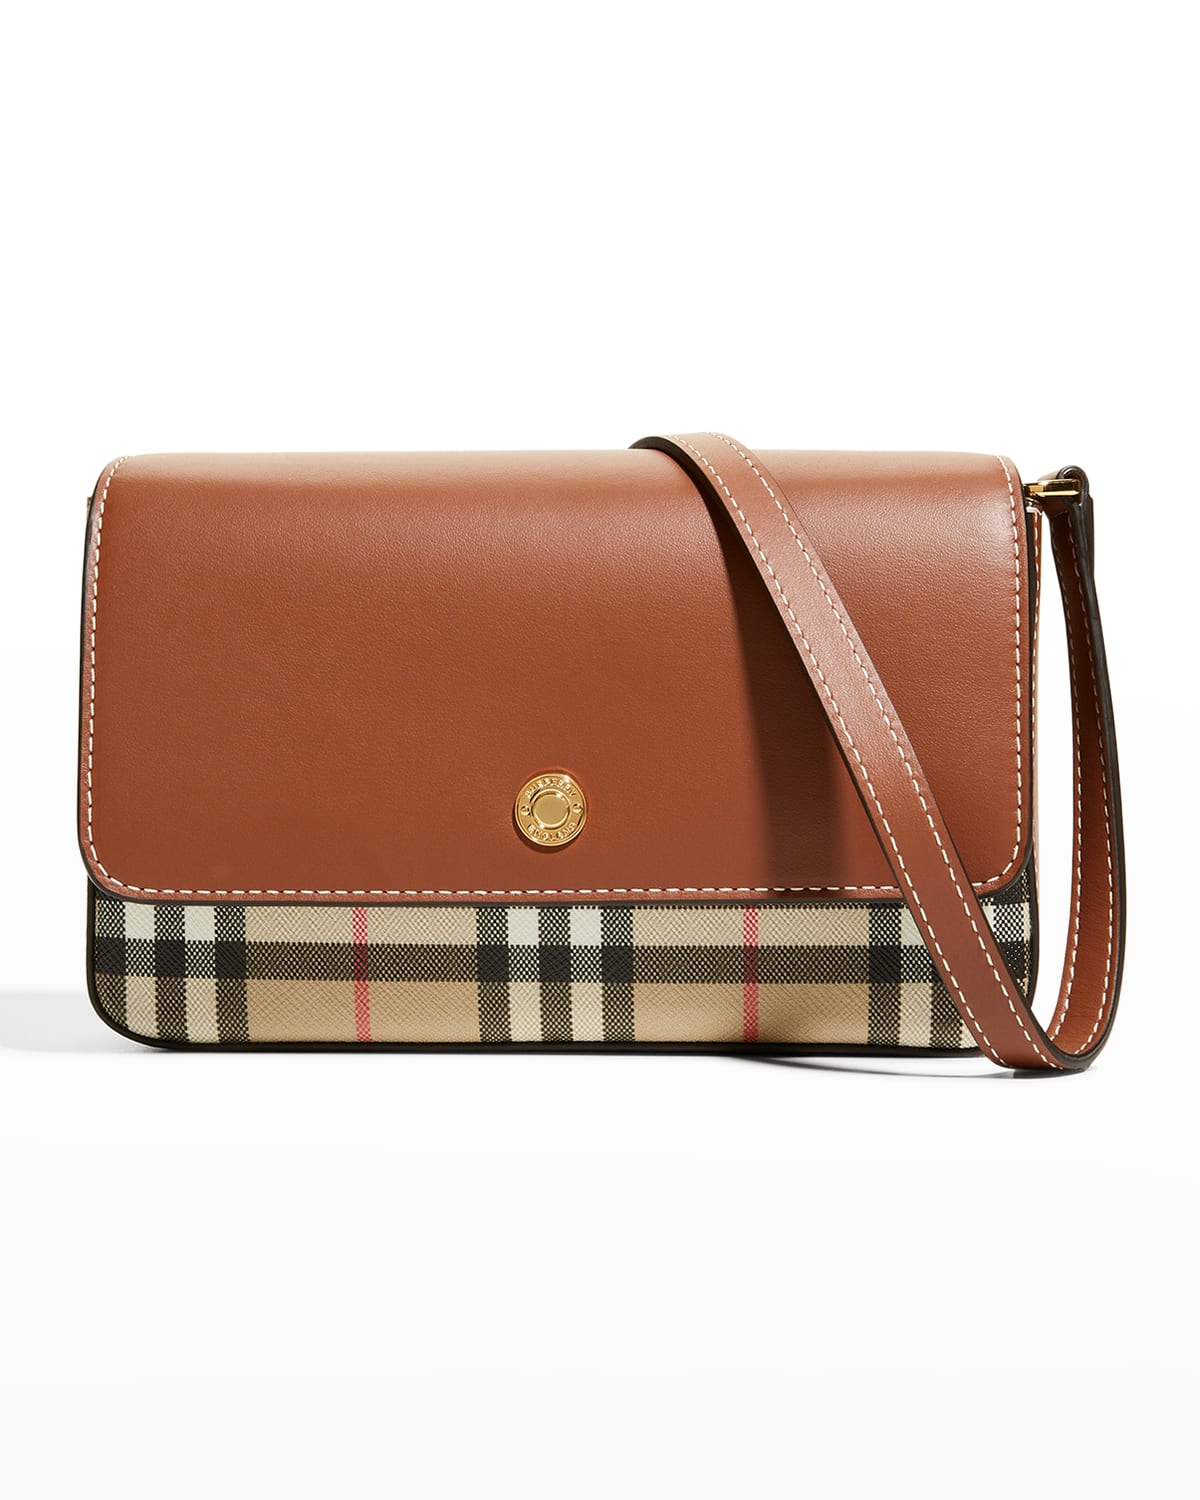 Burberry New Hampshire Check Canvas & Leather Crossbody Bag